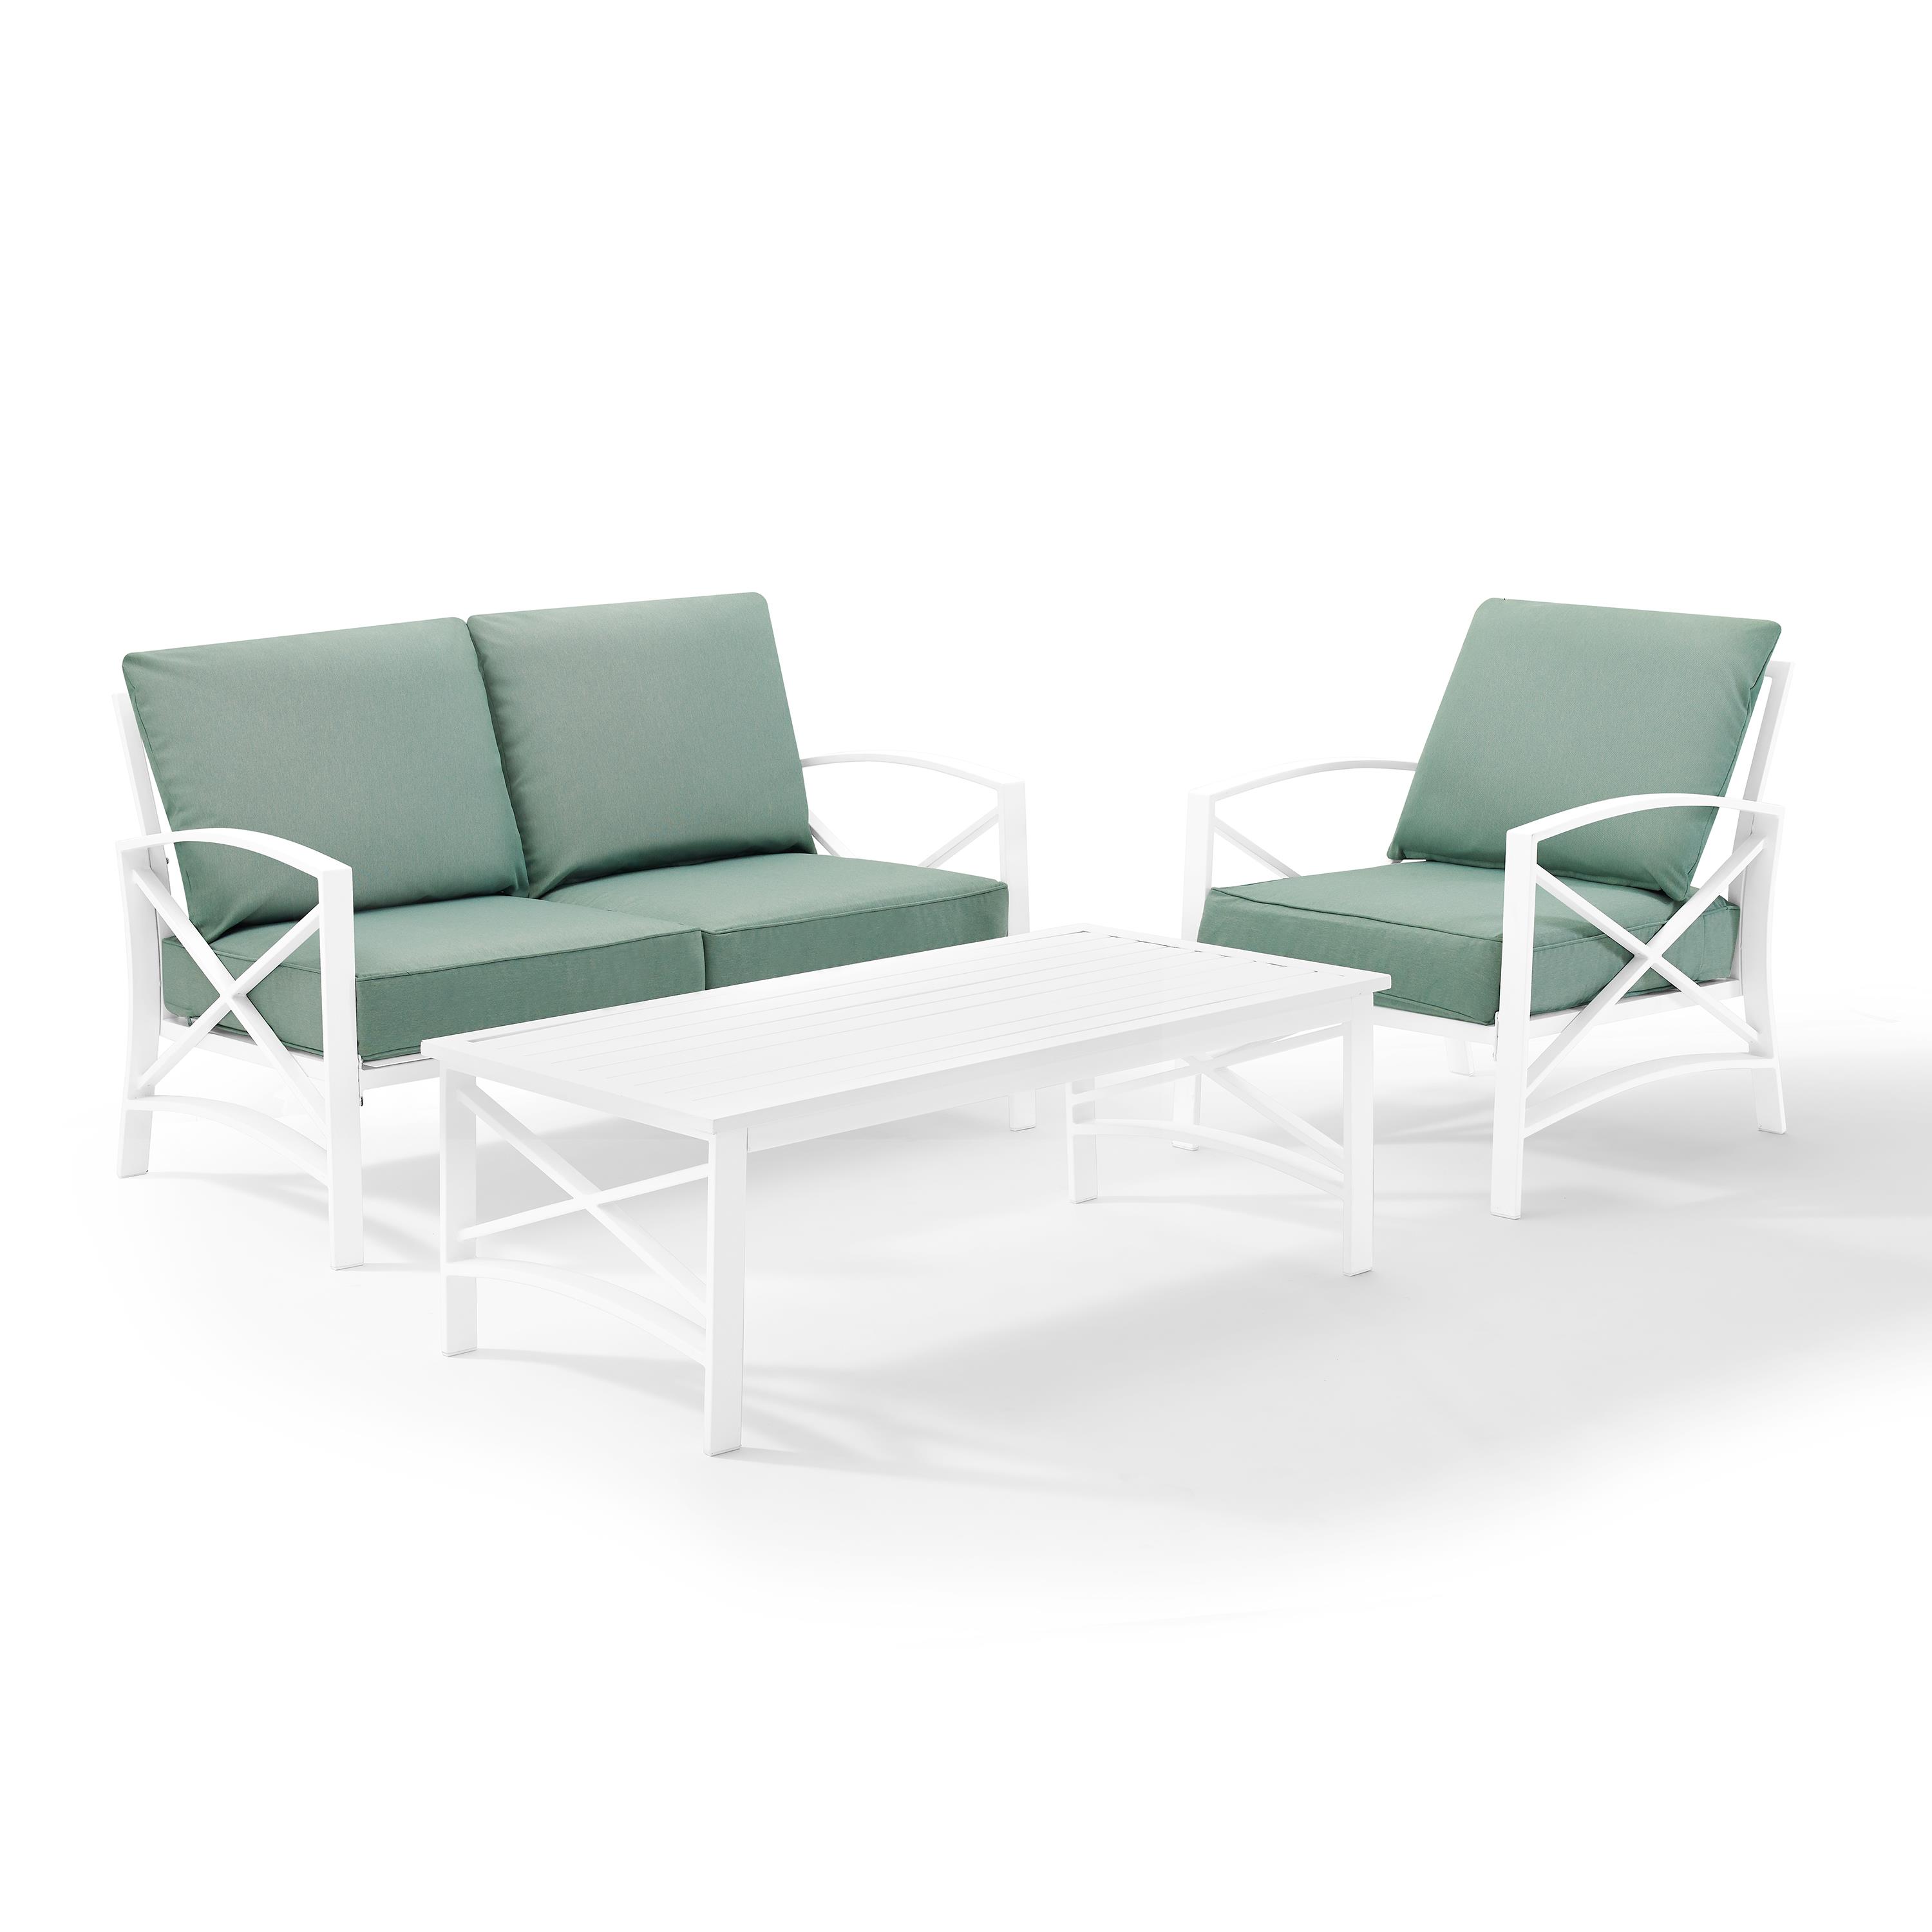 Crosley Kaplan 3 Piece Patio Sofa Set in Mist and White - image 3 of 6